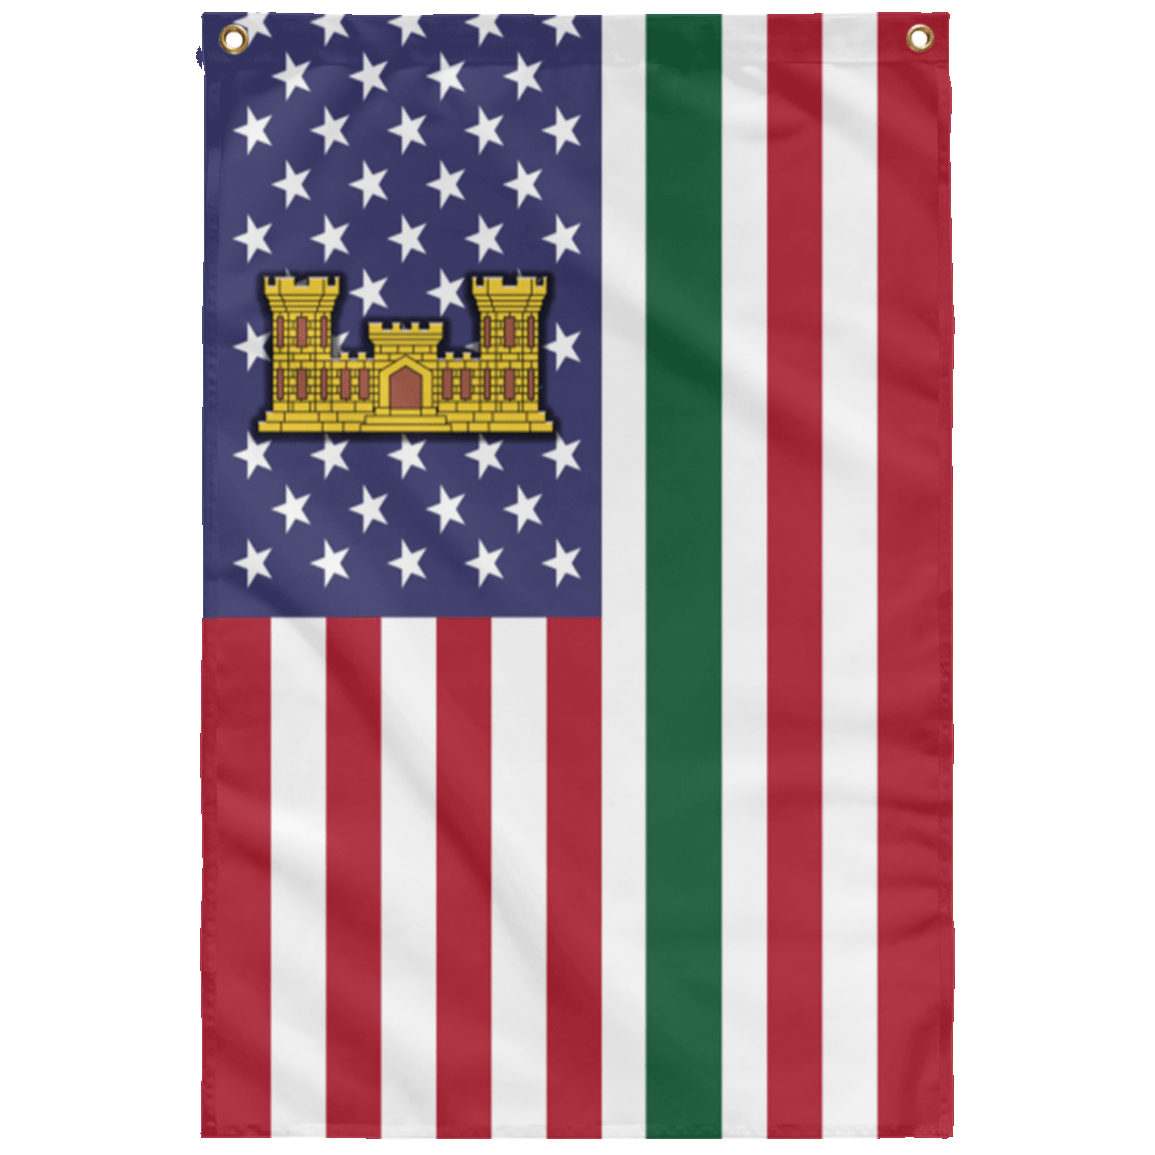 U.S. Army Corps of Engineers Wall Flag 3x5 ft Single Sided Print-WallFlag-Army-Branch-Veterans Nation